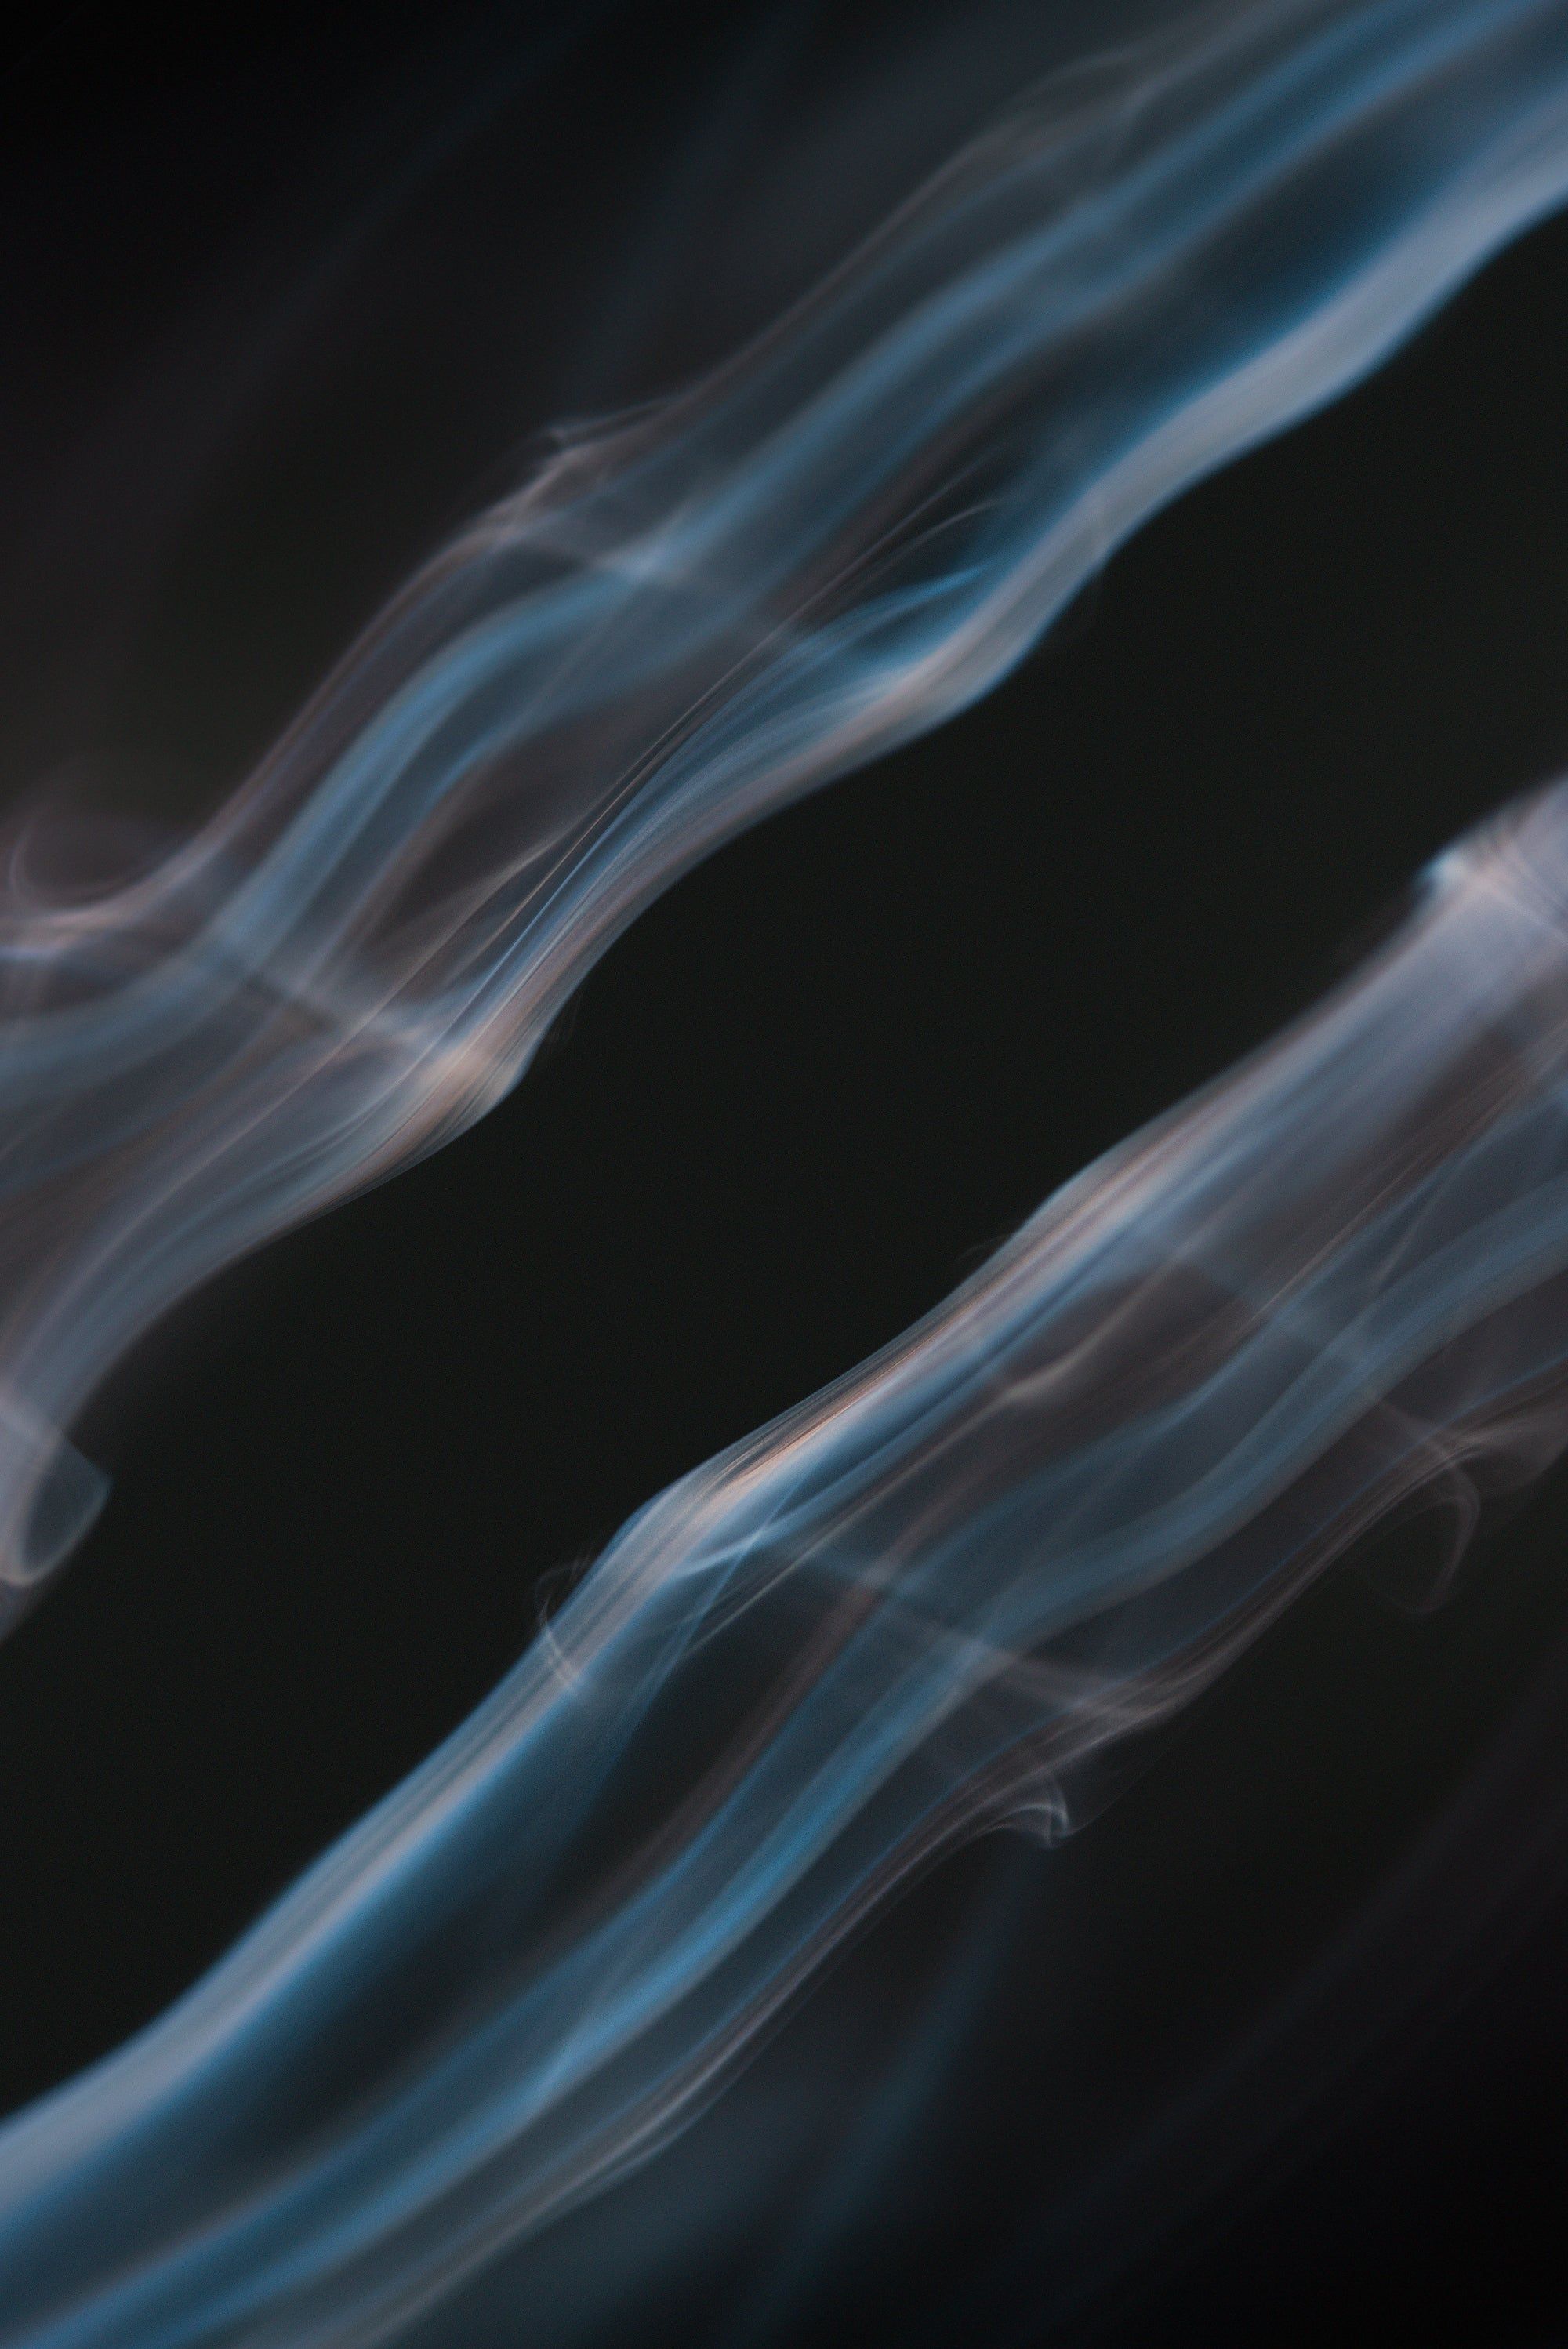 Created this wallpaper from some smoke photography I'm doing